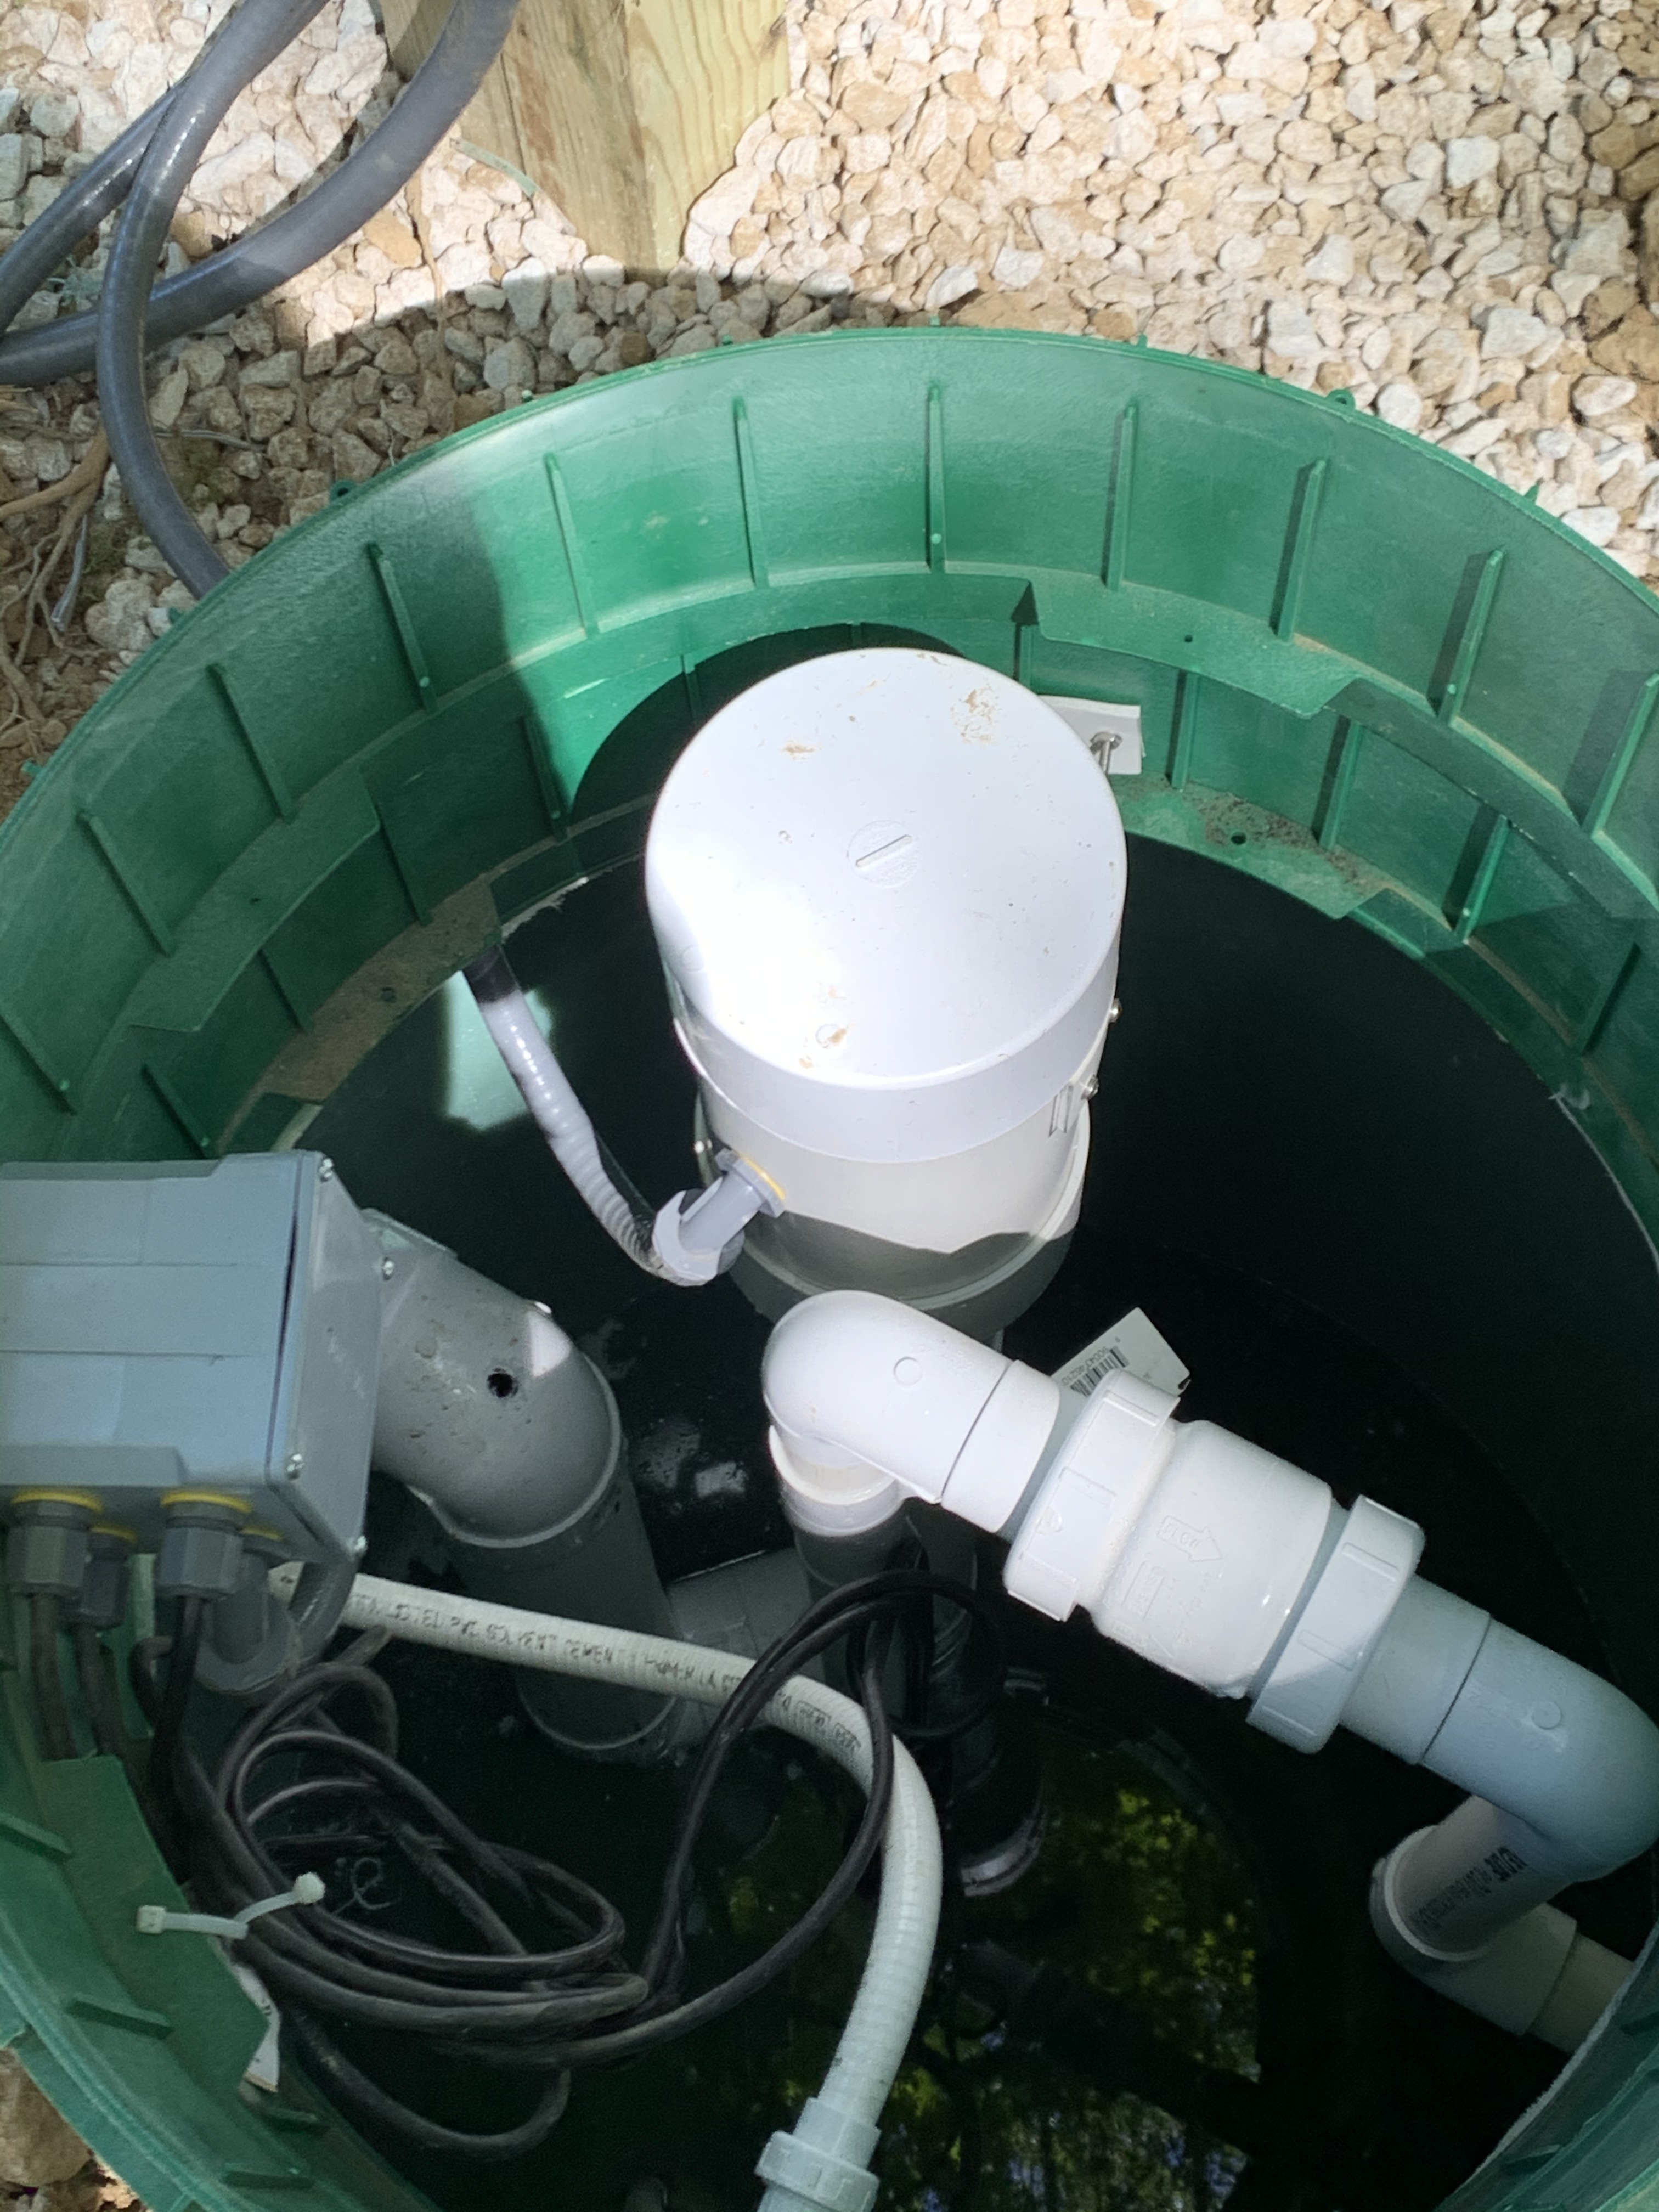 Inside view of septic tank components - Importance of septic tank inspection before purchasing a house for reliable septic system performance.